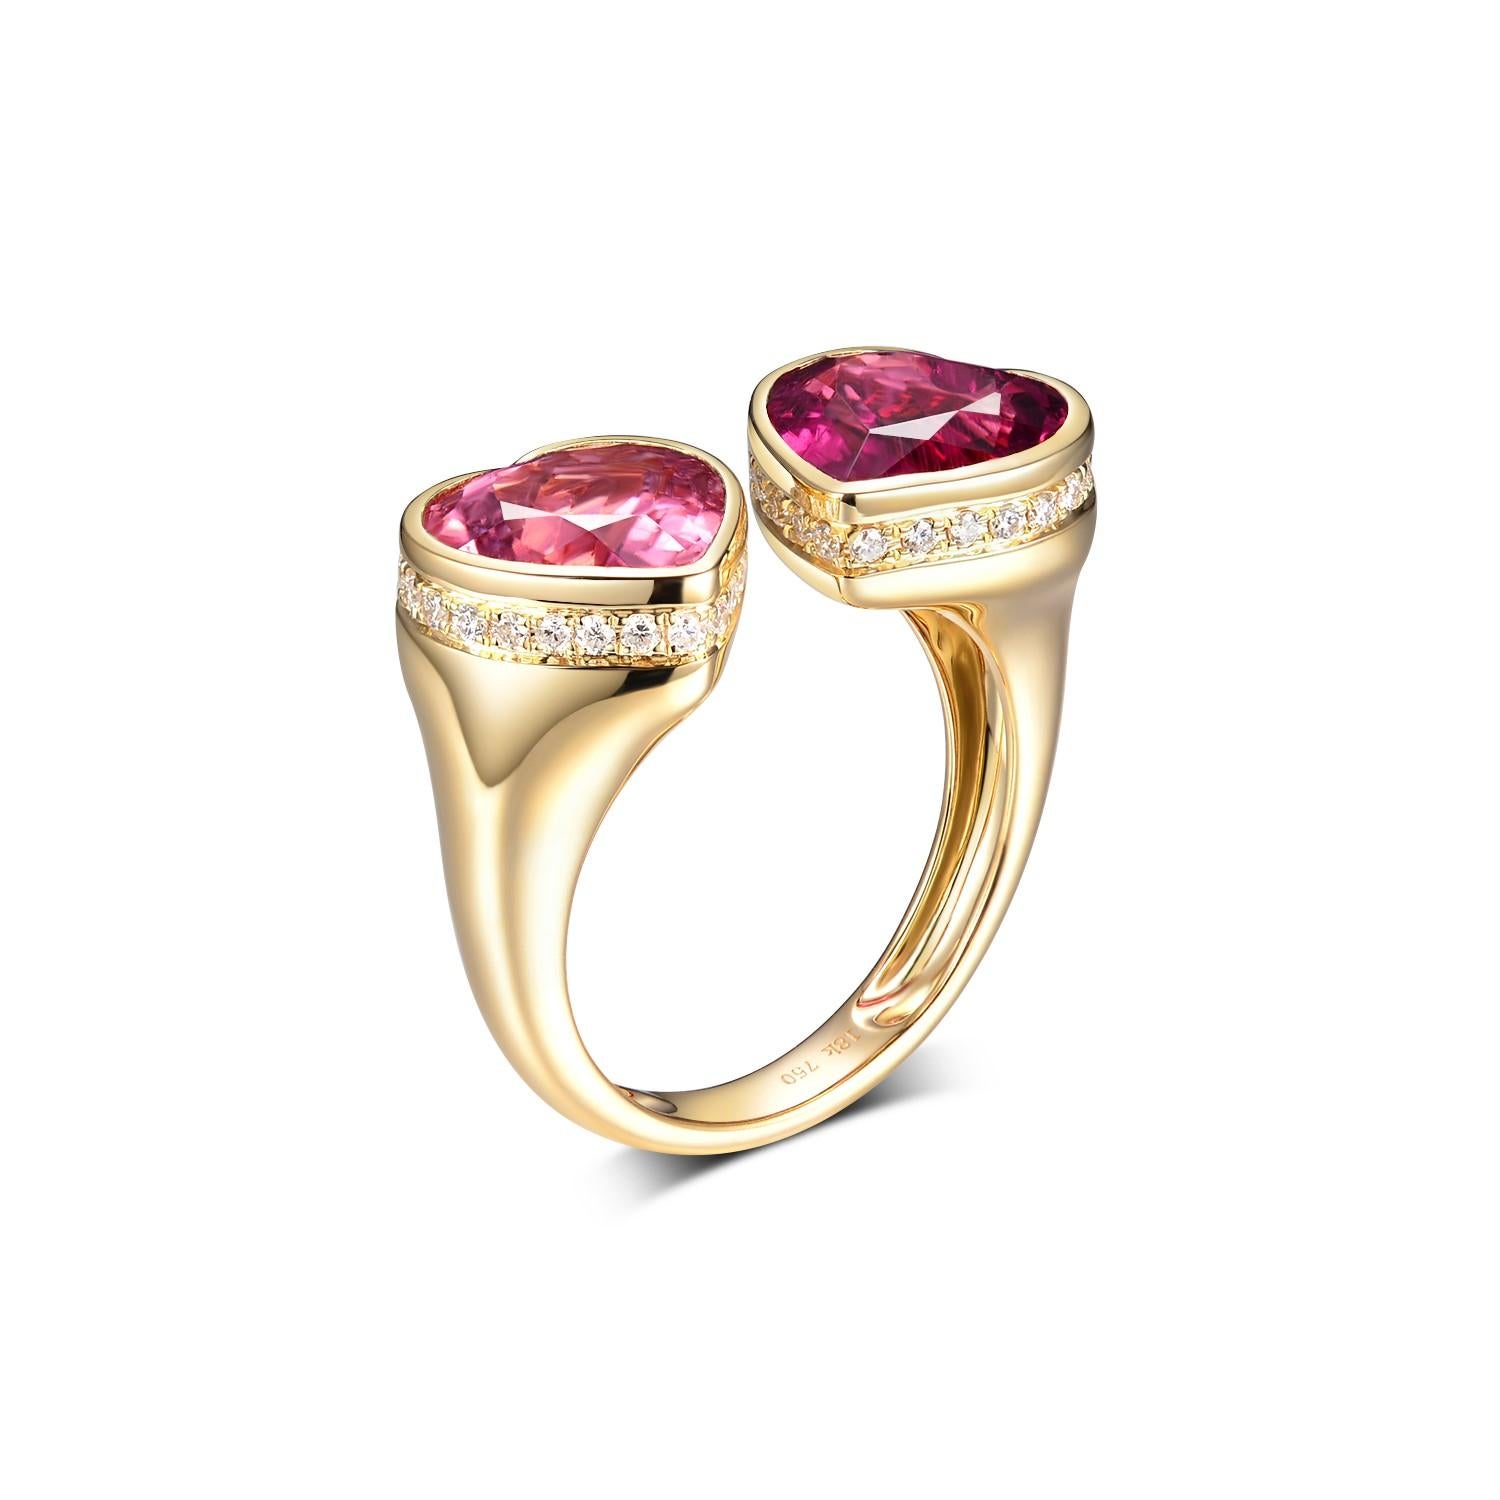 This ring features 2 heart shape tourmaline weighting 5.42 carat, assented with 0.31 carat round brilliant cut diamonds.  Great for everyday use and would make a special gift for your loved one. 

US 6.75
Resizing is available
Tourmaline 5.42 carat